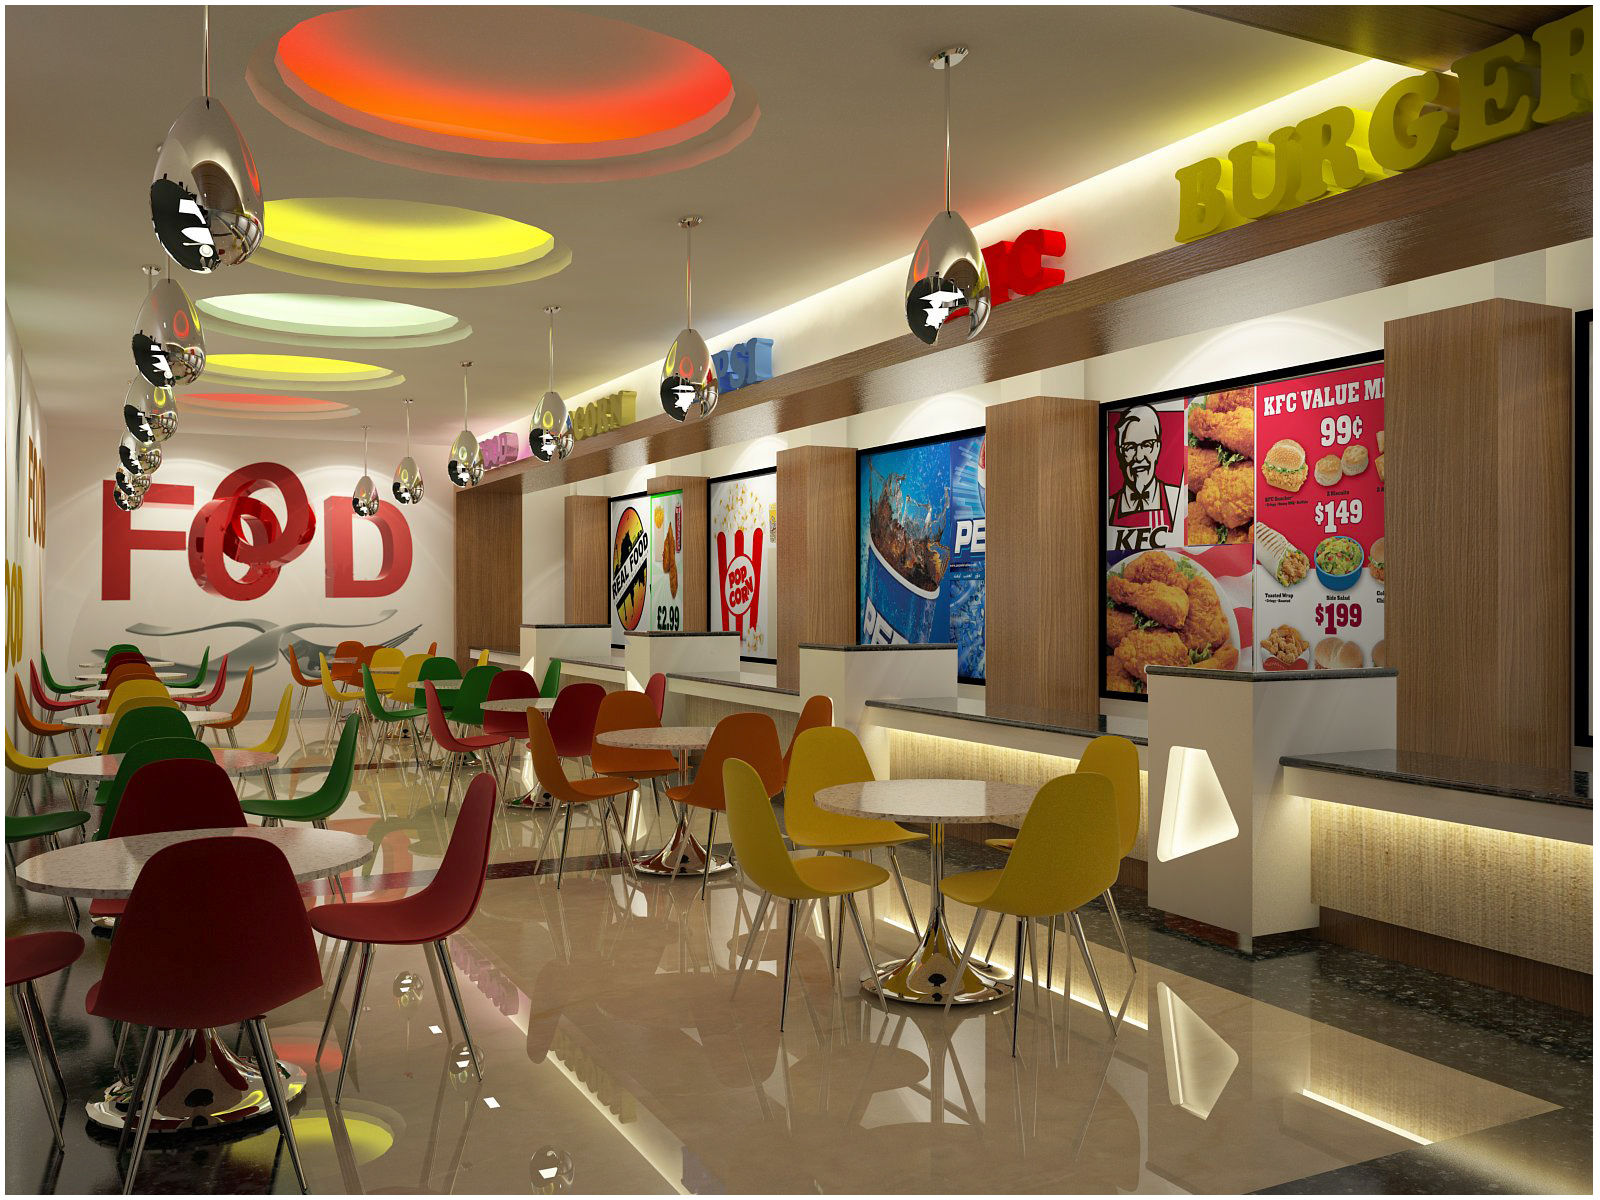  Sale of commercial Property with Food Court  Manikonda  main Road,